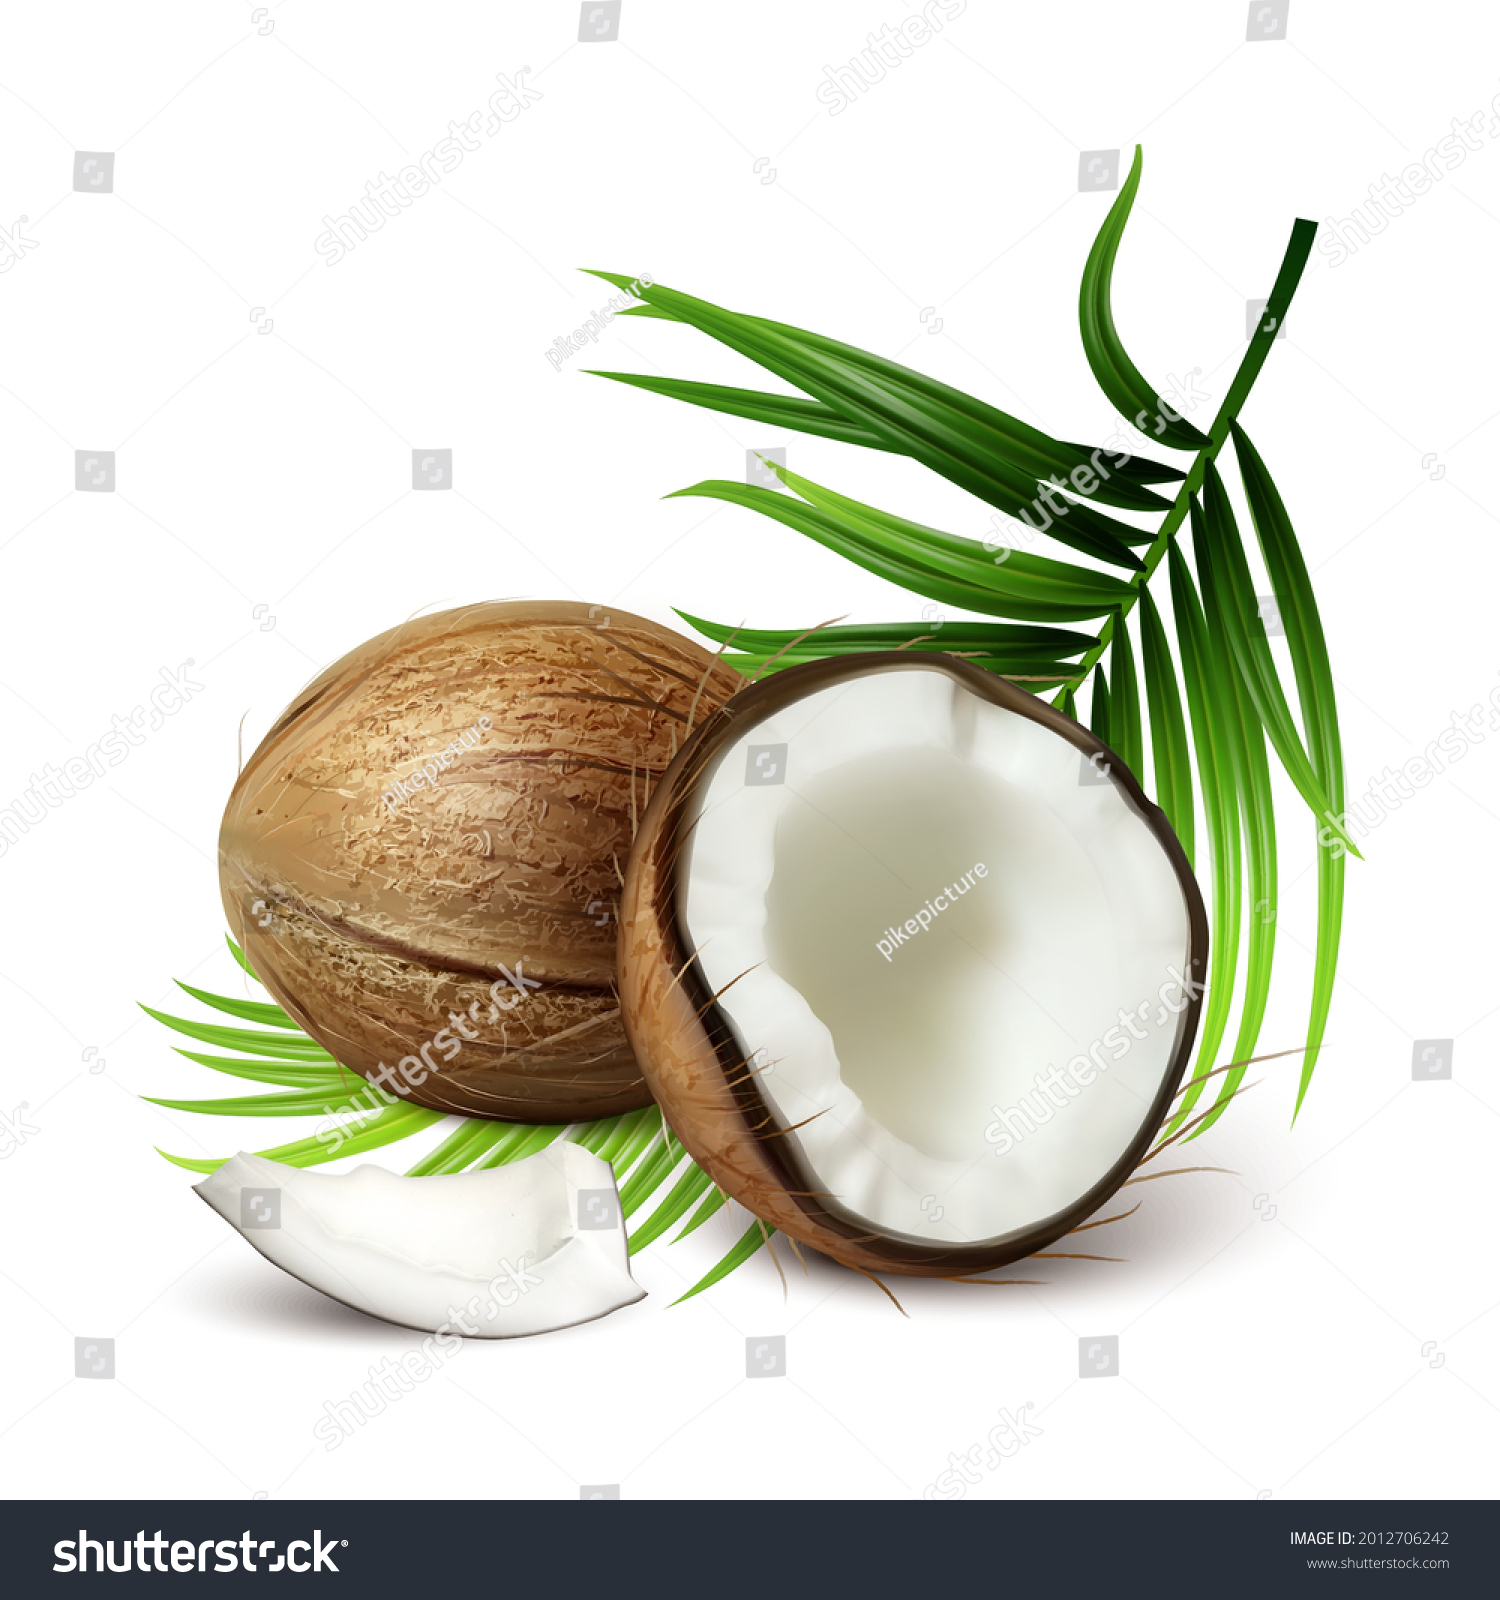 SVG of Coconut Fresh Tropical Nut And Tree Leaves Vector. Whole And Crashed Vegetarian Natural Ripe Coconut, Tasty Vitamin Nutrition. Milky Coco And Palm Branch Template Realistic 3d Illustration svg